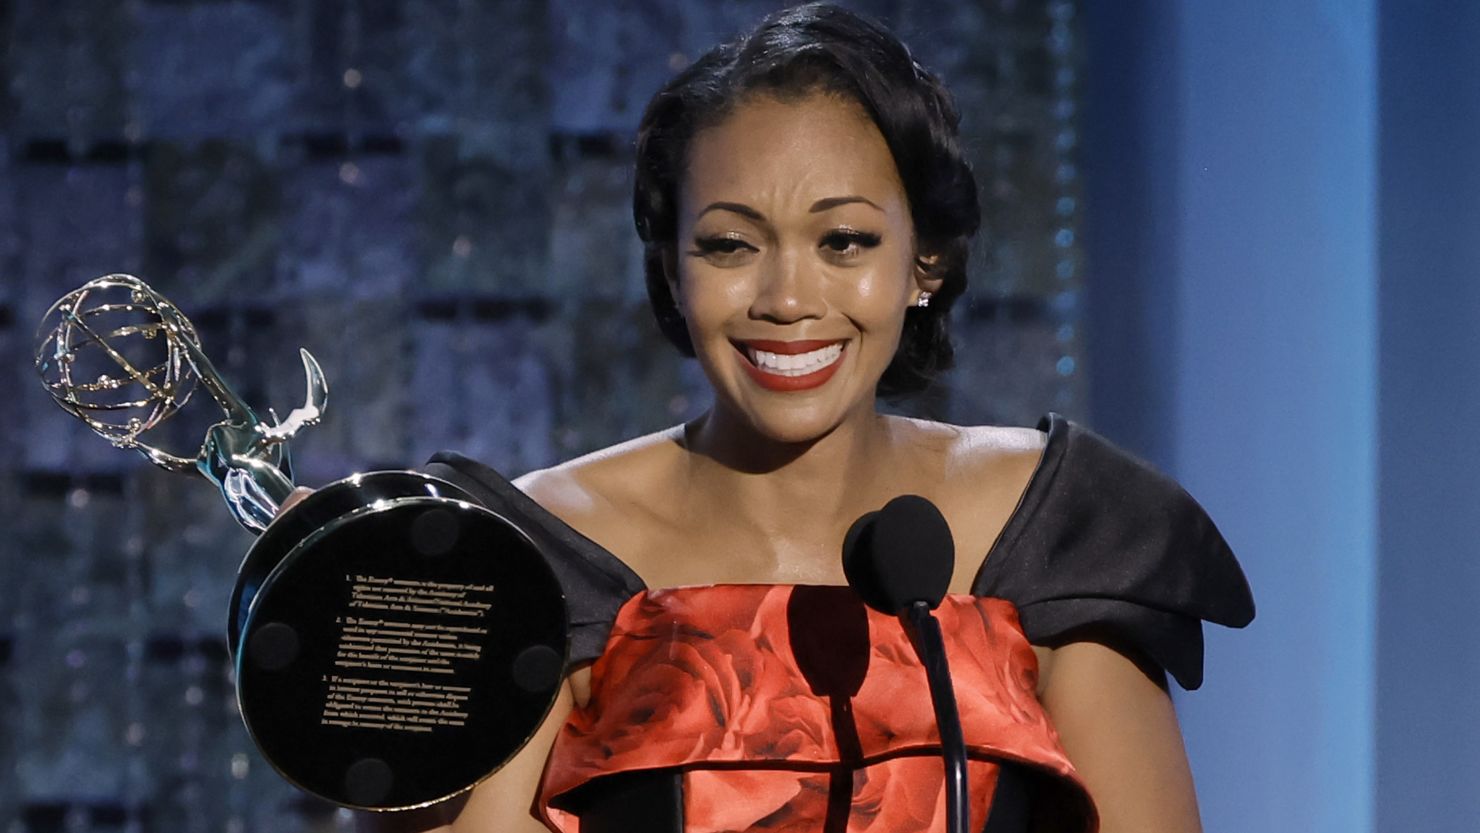 Mishael Morgan accepts the Outstanding Performance by a Lead Actress in a Drama Series award onstage during the 49th Daytime Emmy Awards at Pasadena Convention Center on June 24, 2022 in Pasadena, California.